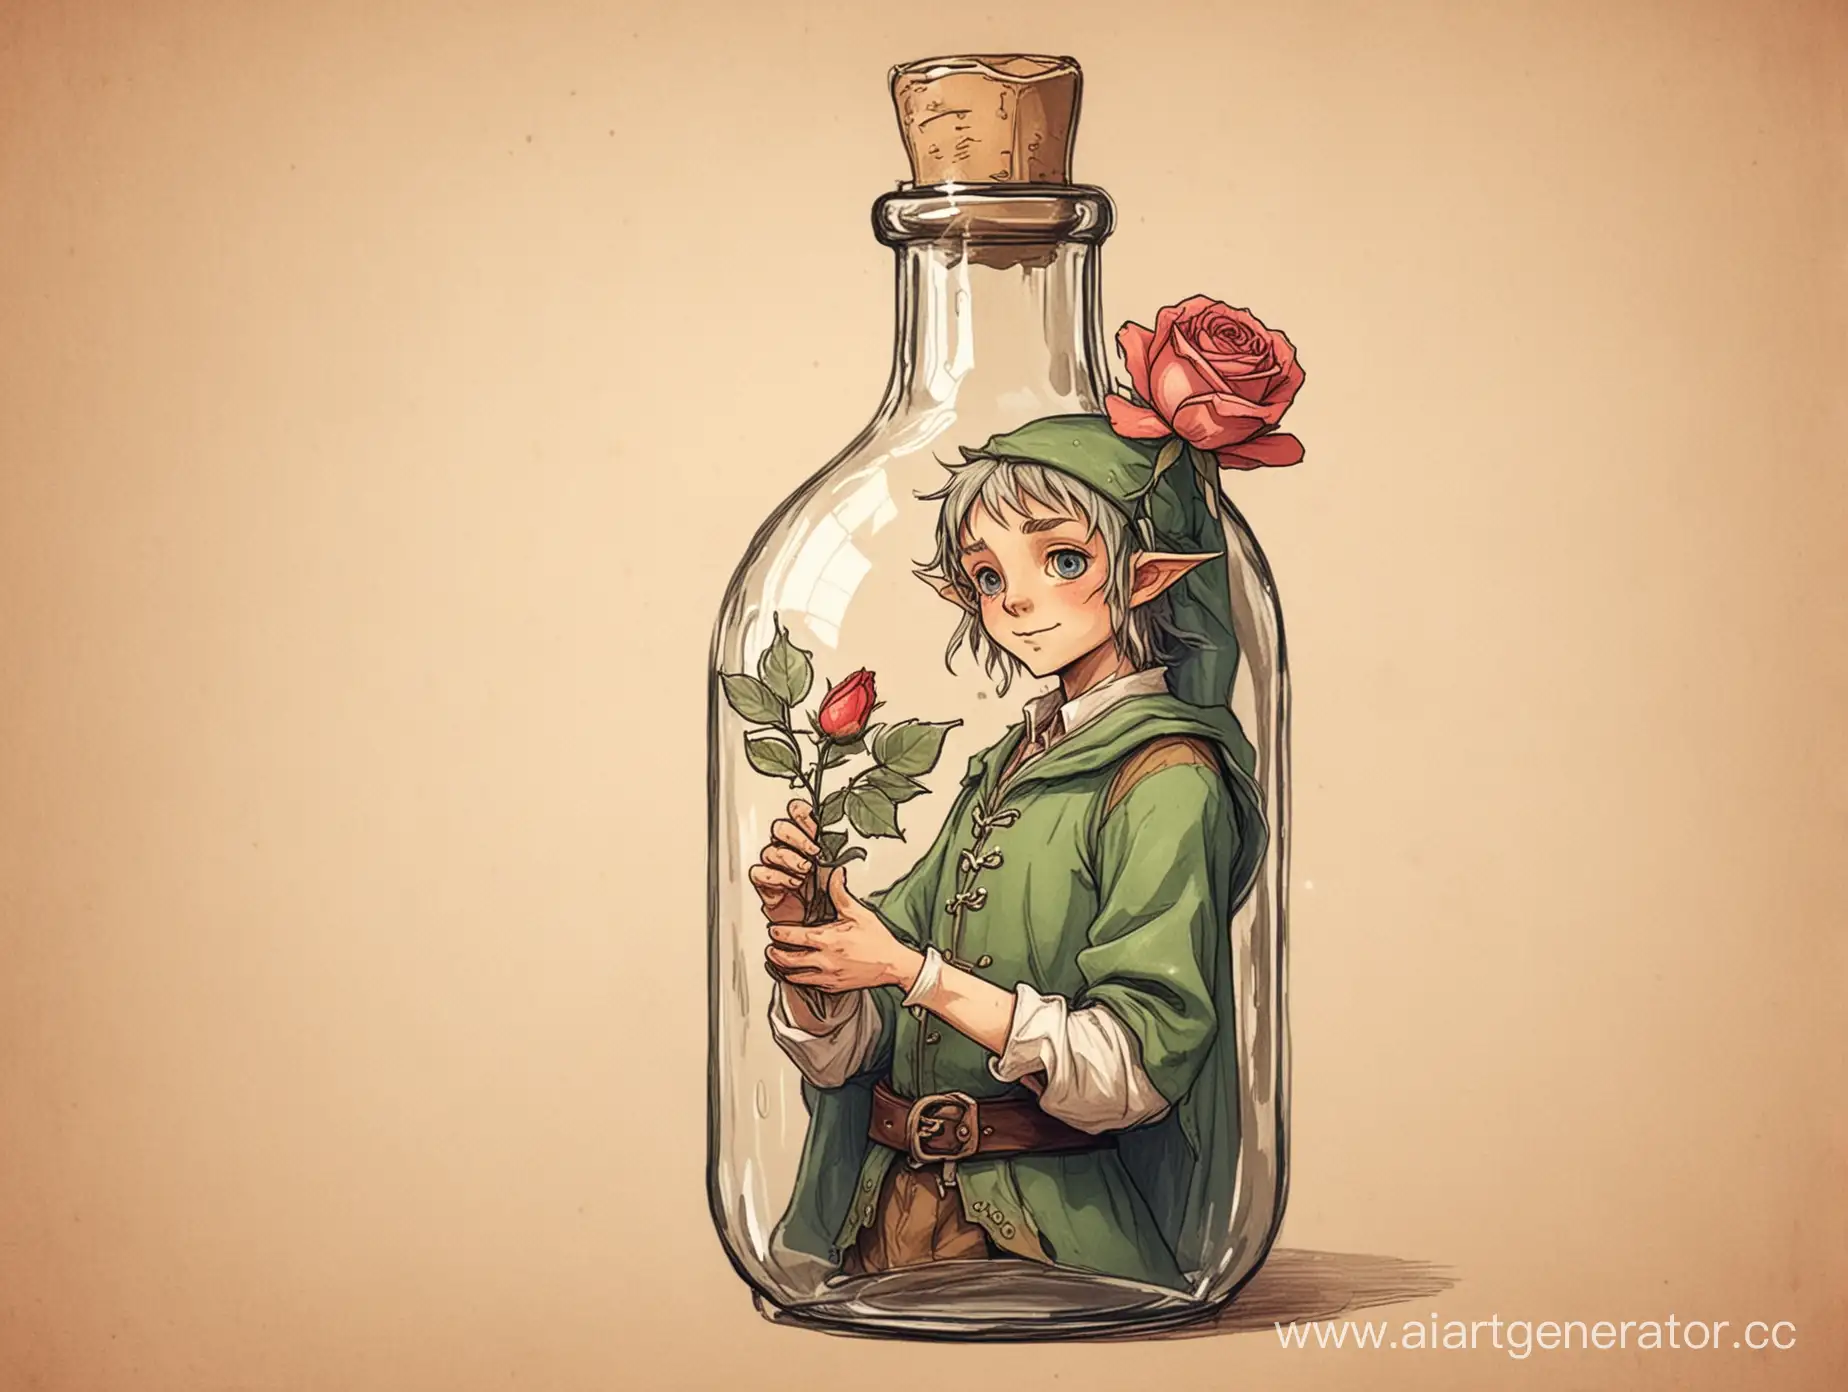 Anime-Drawing-of-Elf-Holding-Rose-in-Bottle